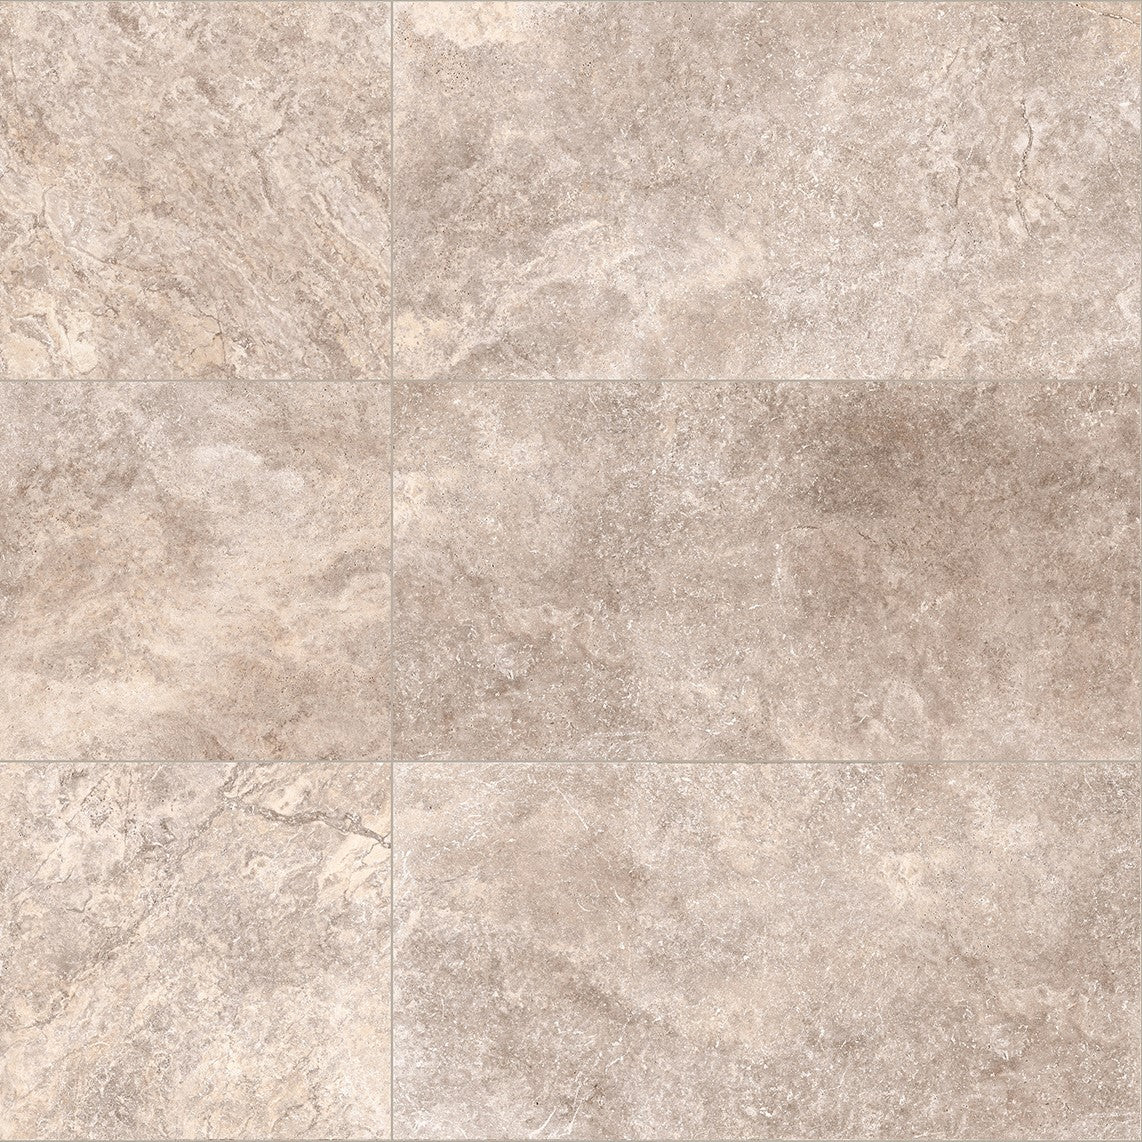 surface group international frontier 20 porcelain paving tile travertine silver cross cut 24x48 for outdoor application manufactured by landmark